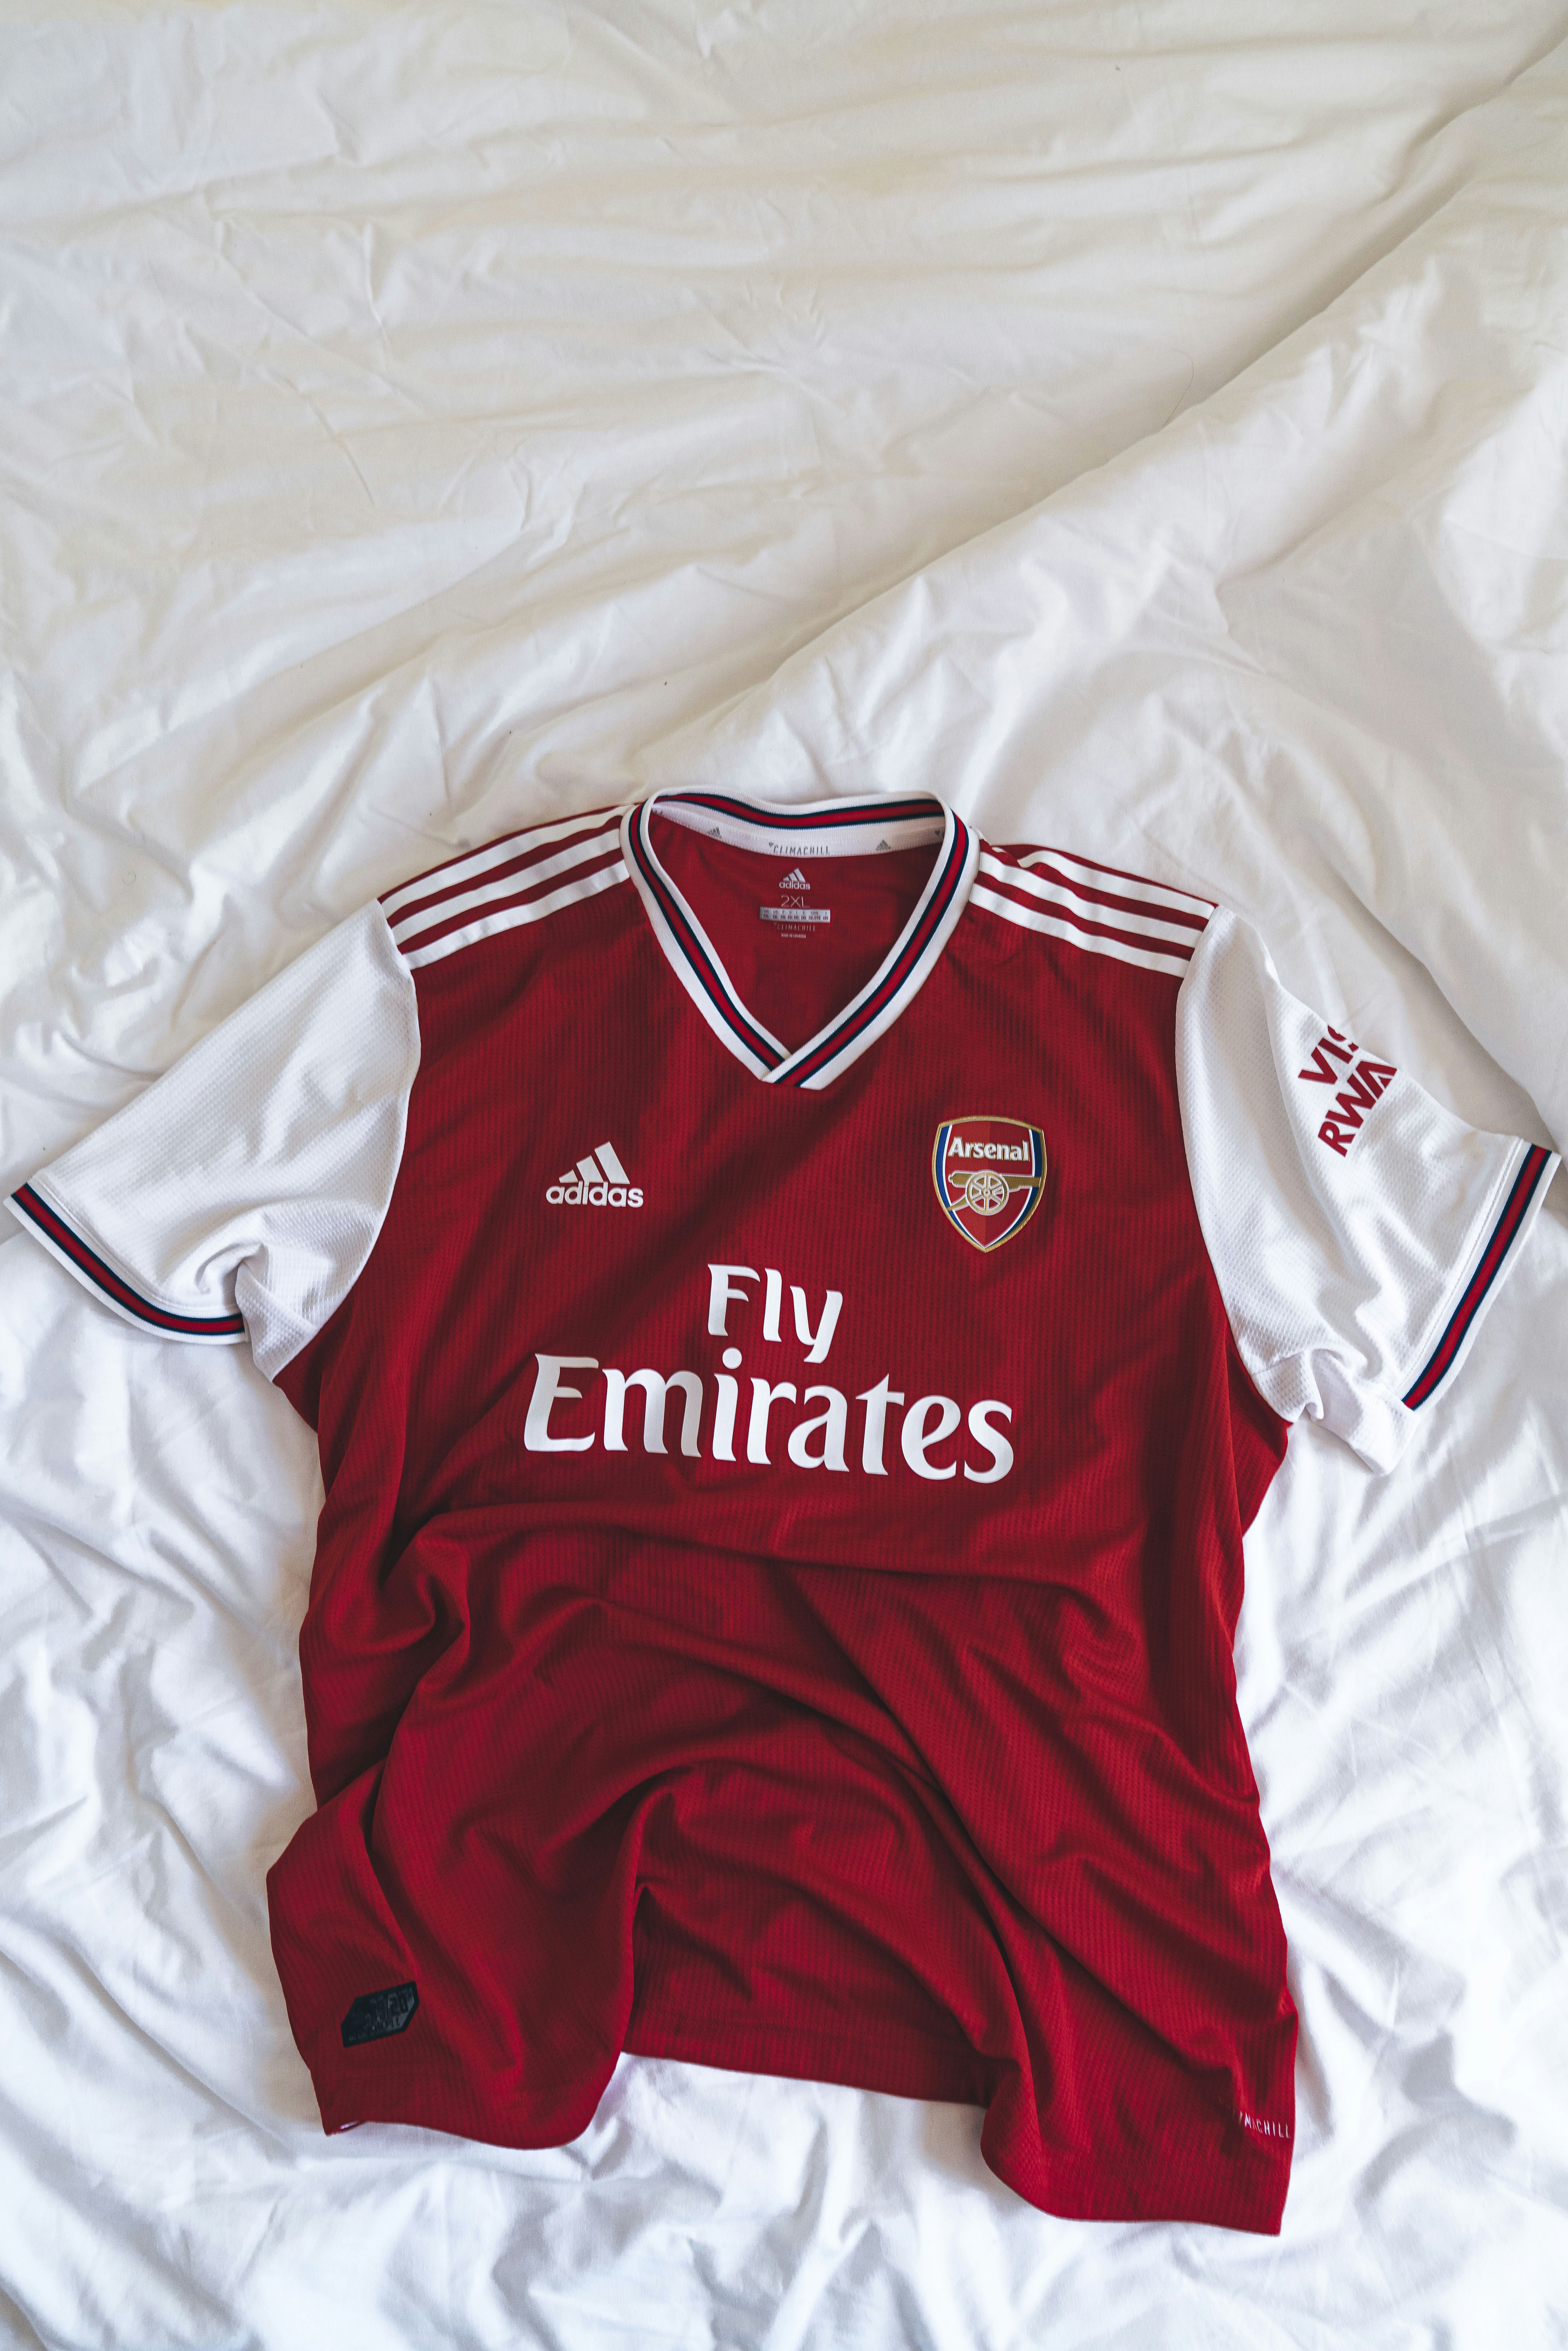 fly emirates jersey outfit